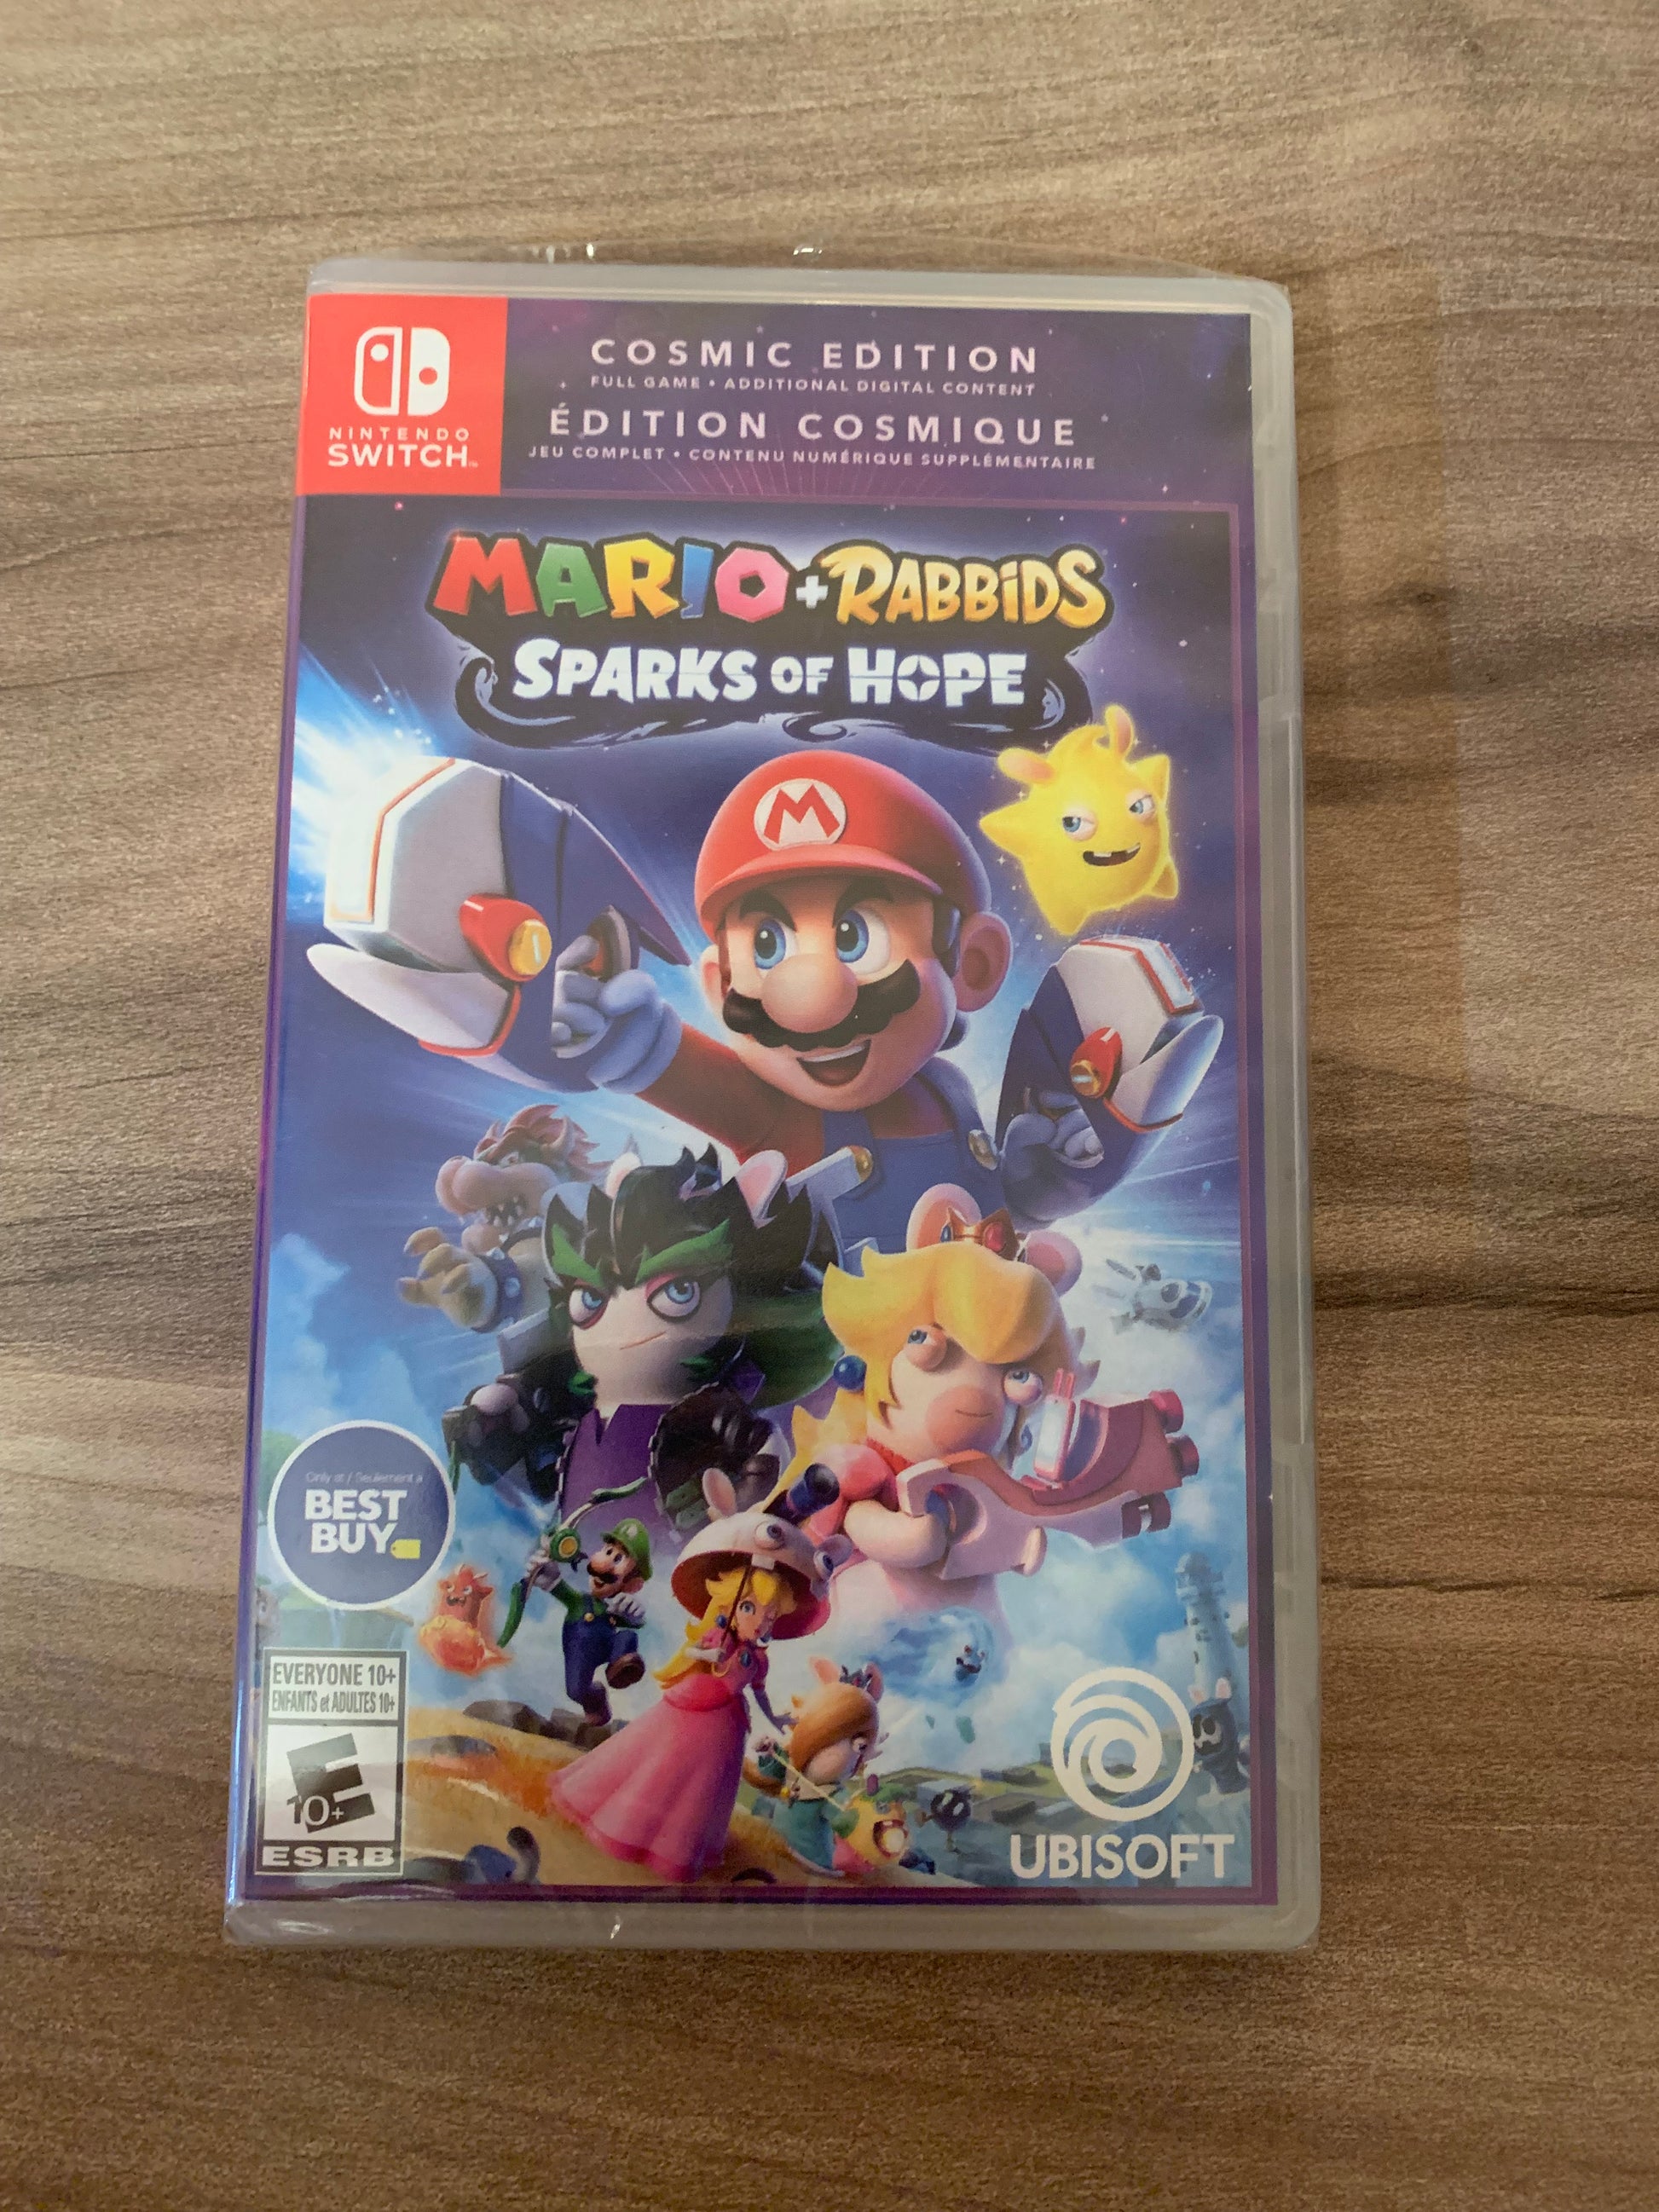 PiXEL-RETRO.COM : NINTENDO SWITCH NEW SEALED IN BOX COMPLETE MANUAL GAME NTSC MARIO + RABBIDS SPARKS OF HOPE COSMIC EDITION